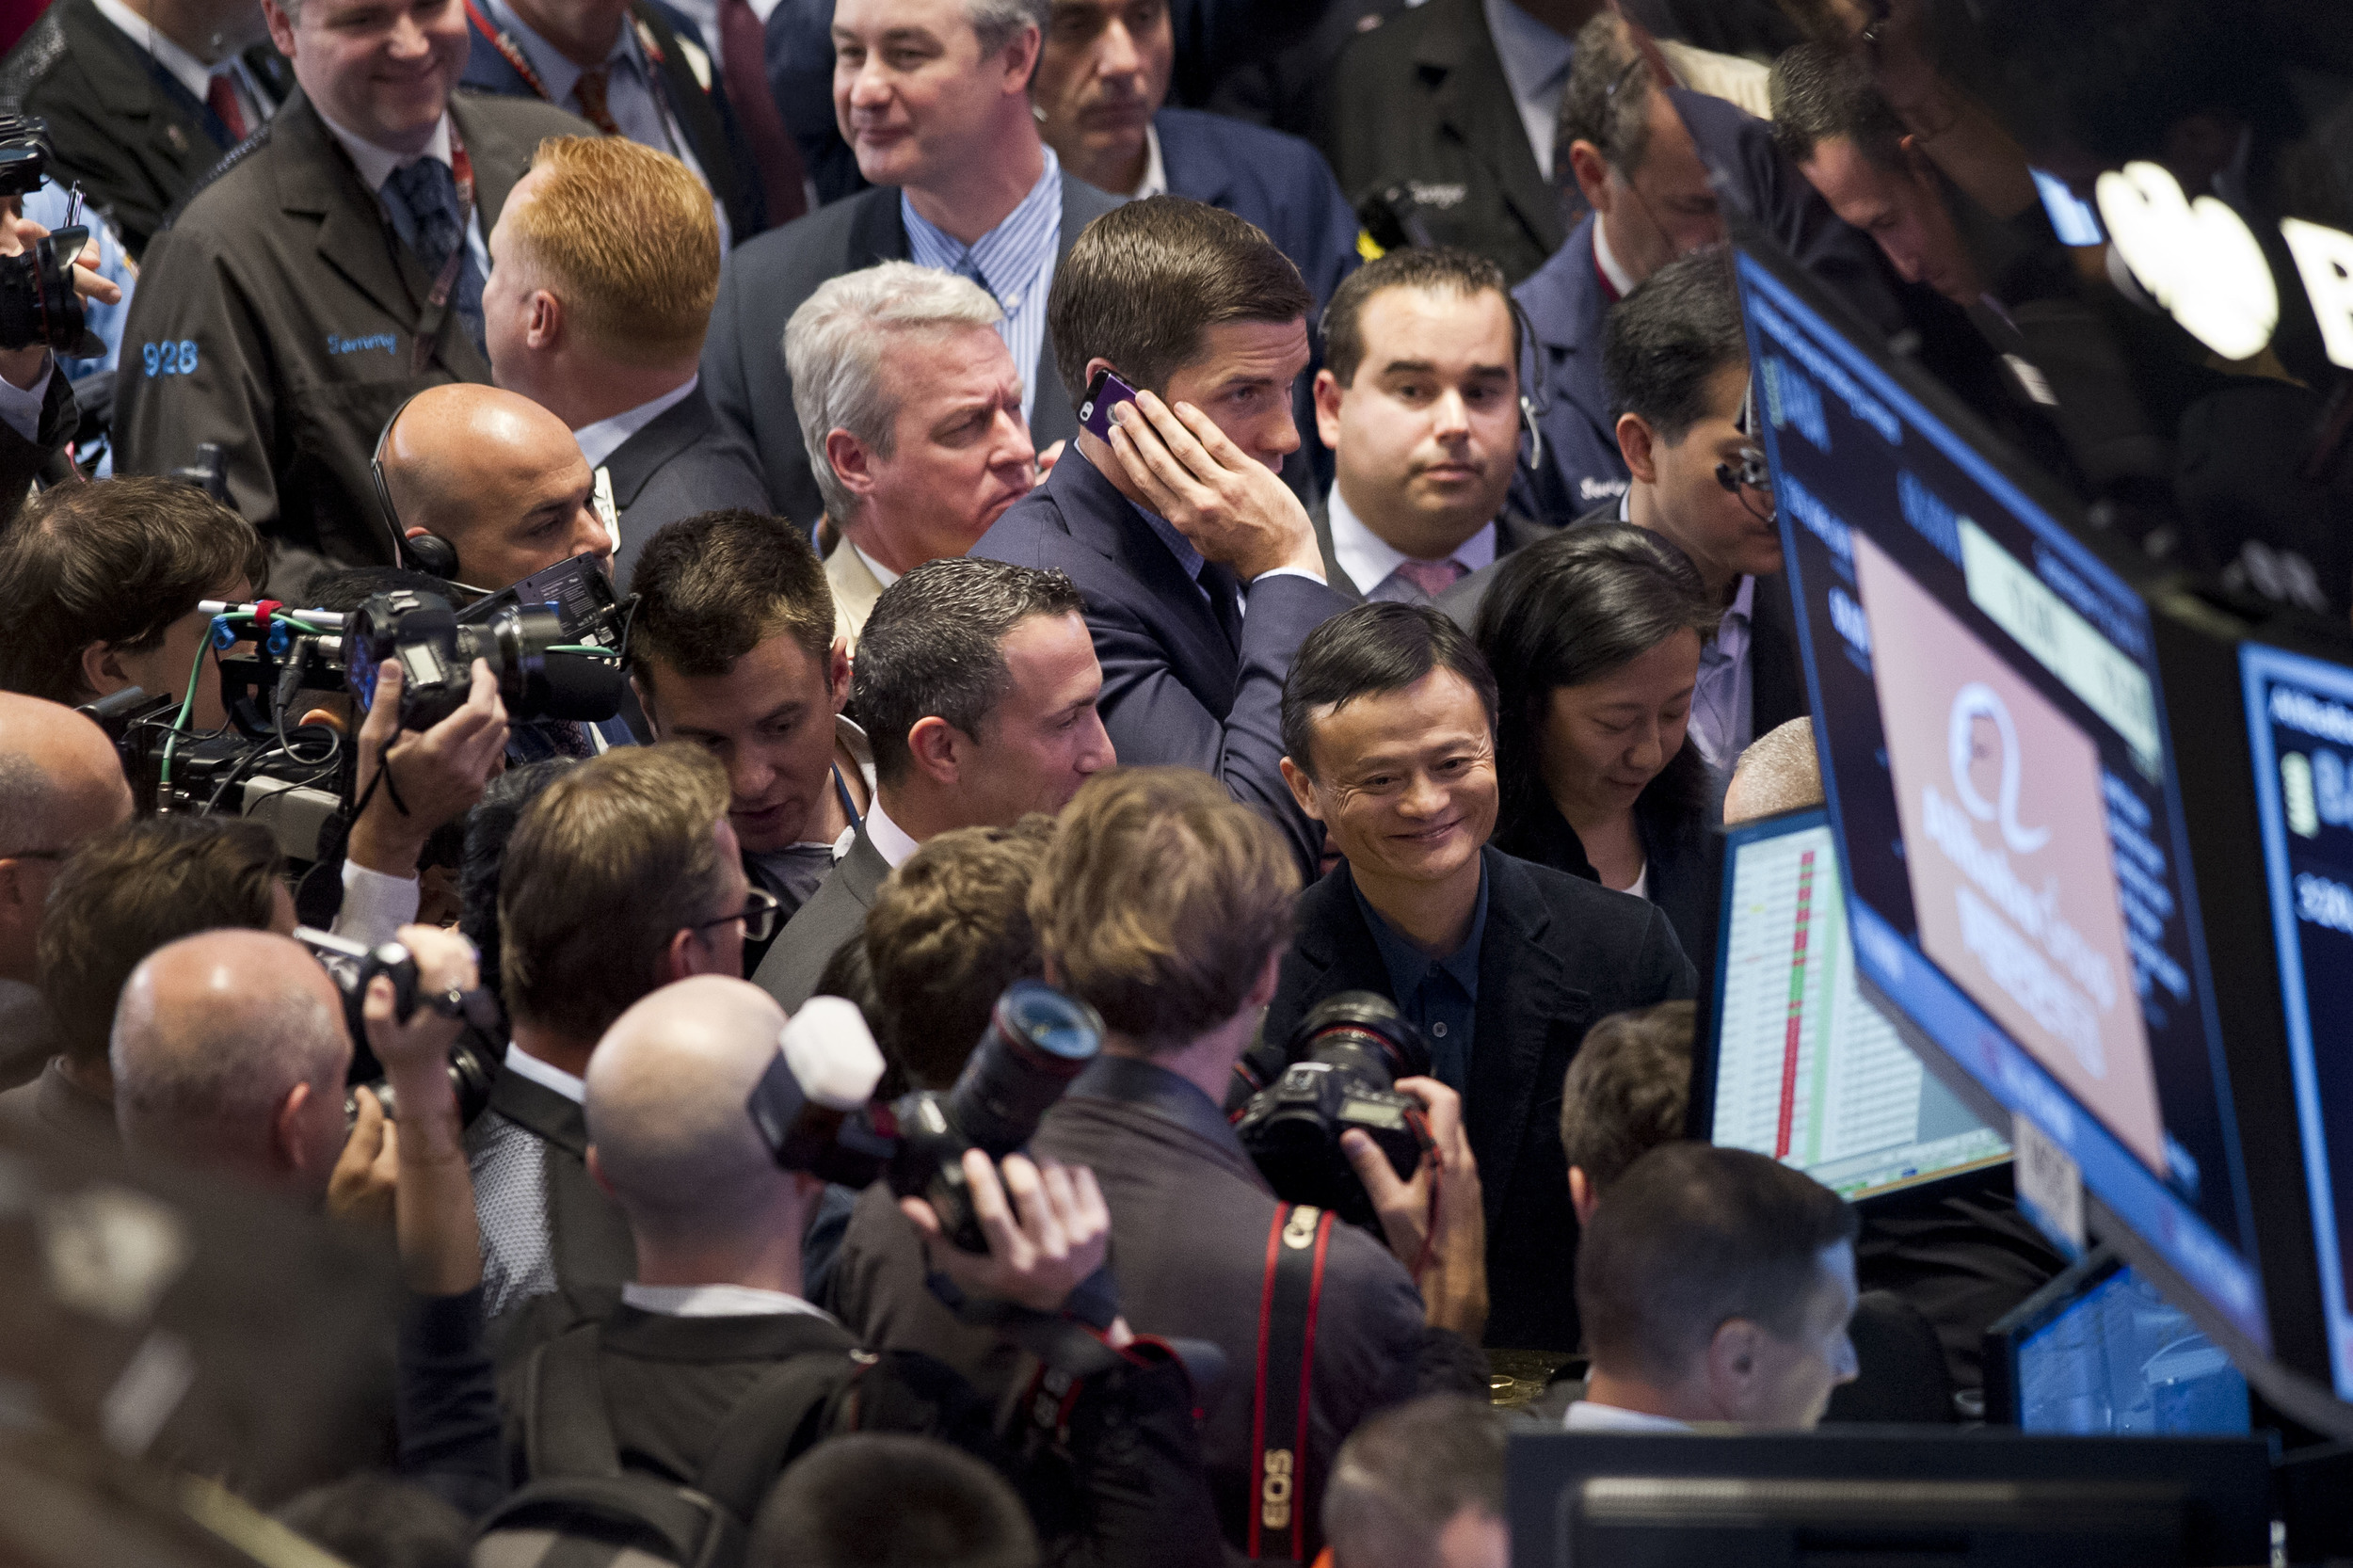  Alibaba CEO Jack Ma smiles calmly as his company brings the Exchange the largest IPO in history with an initial valuation of 25 billion USD.&nbsp; 